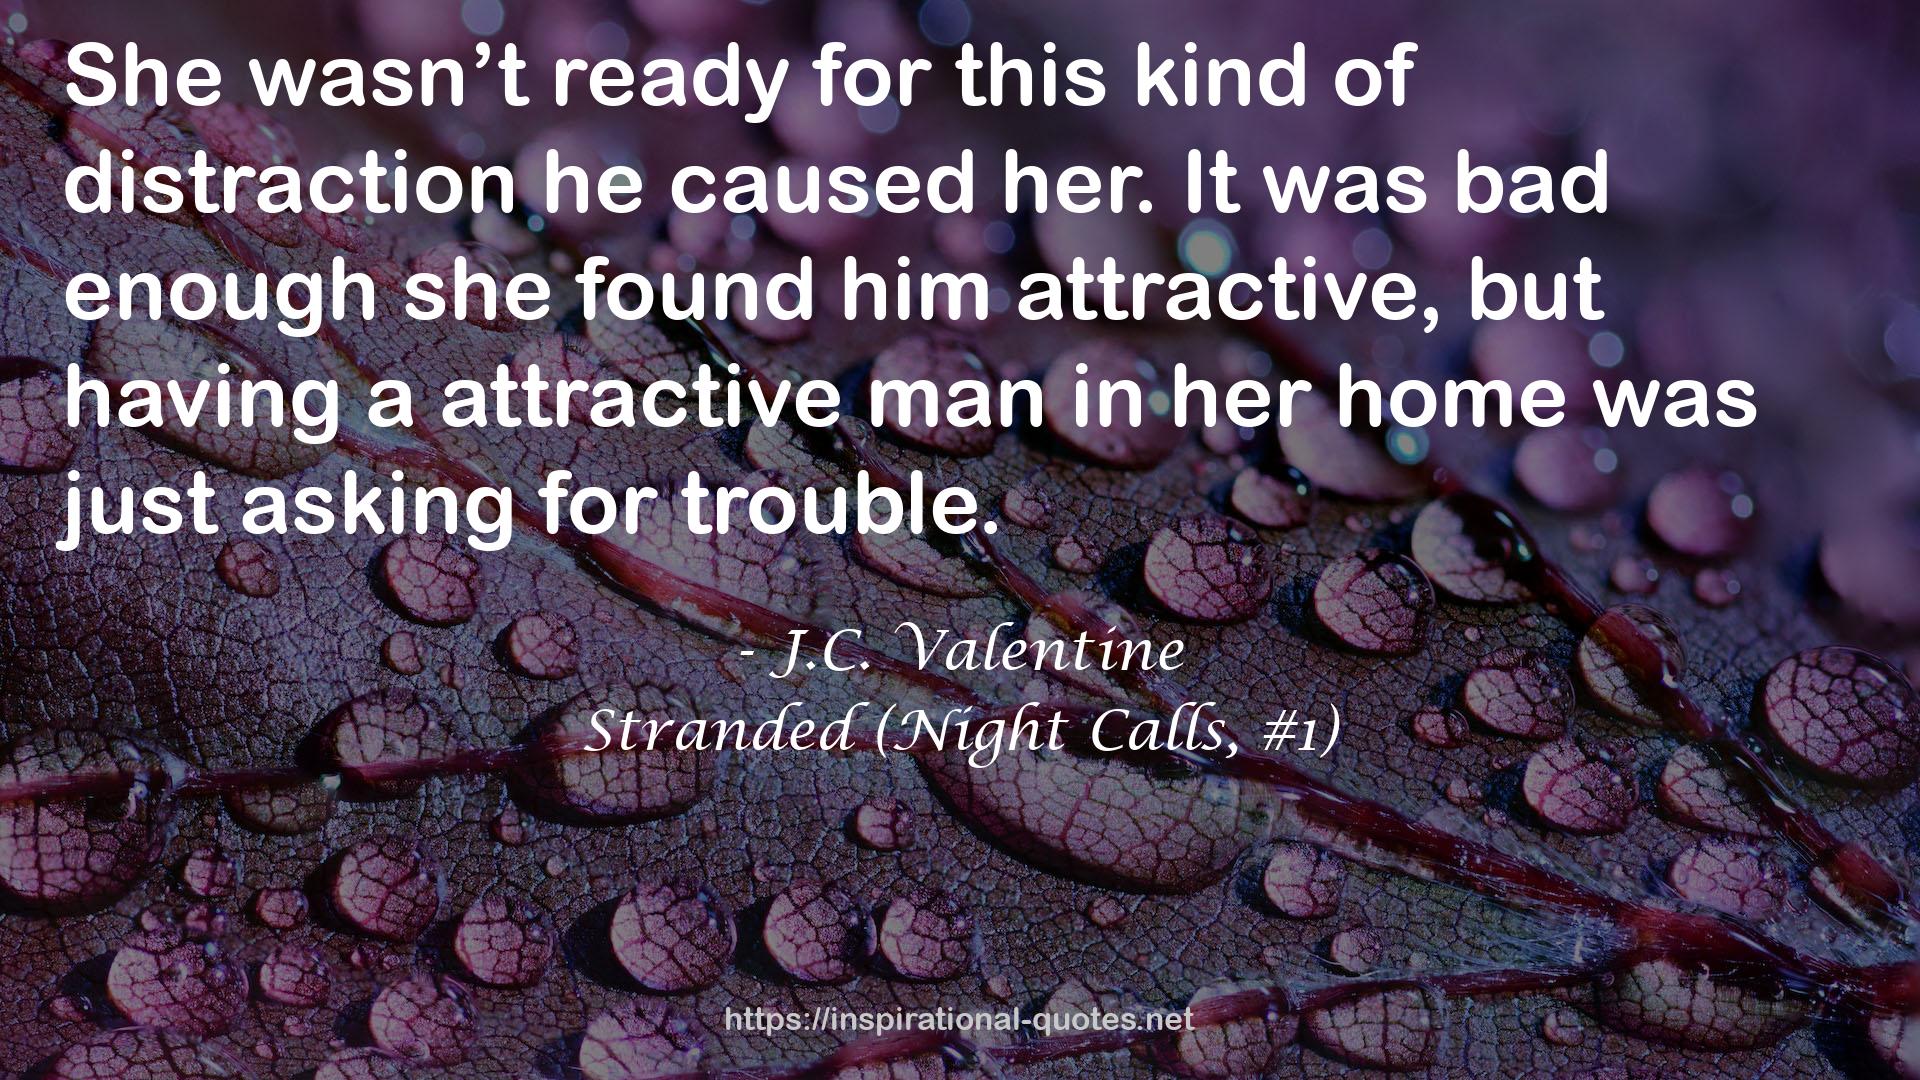 Stranded (Night Calls, #1) QUOTES